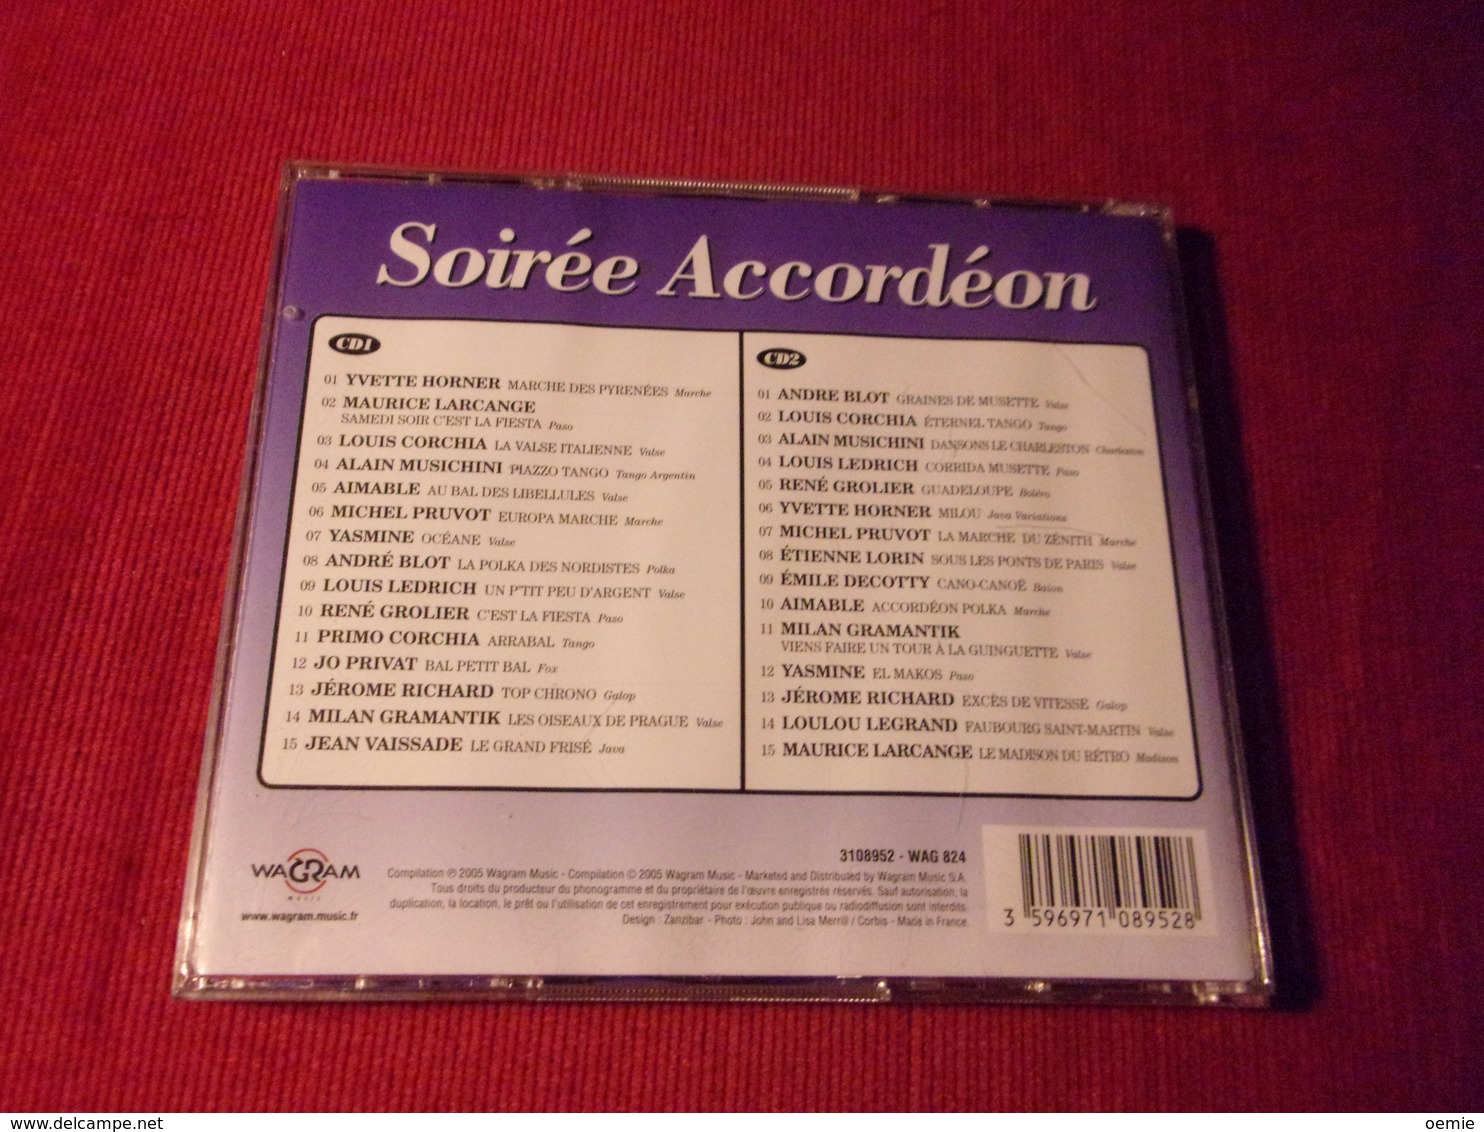 SOIREE ACCORDEON  COMPILATION 30 TITRES  D'YVETTE HORNER A MAURICE LARCANGE  DOUBLE CD - Compilations